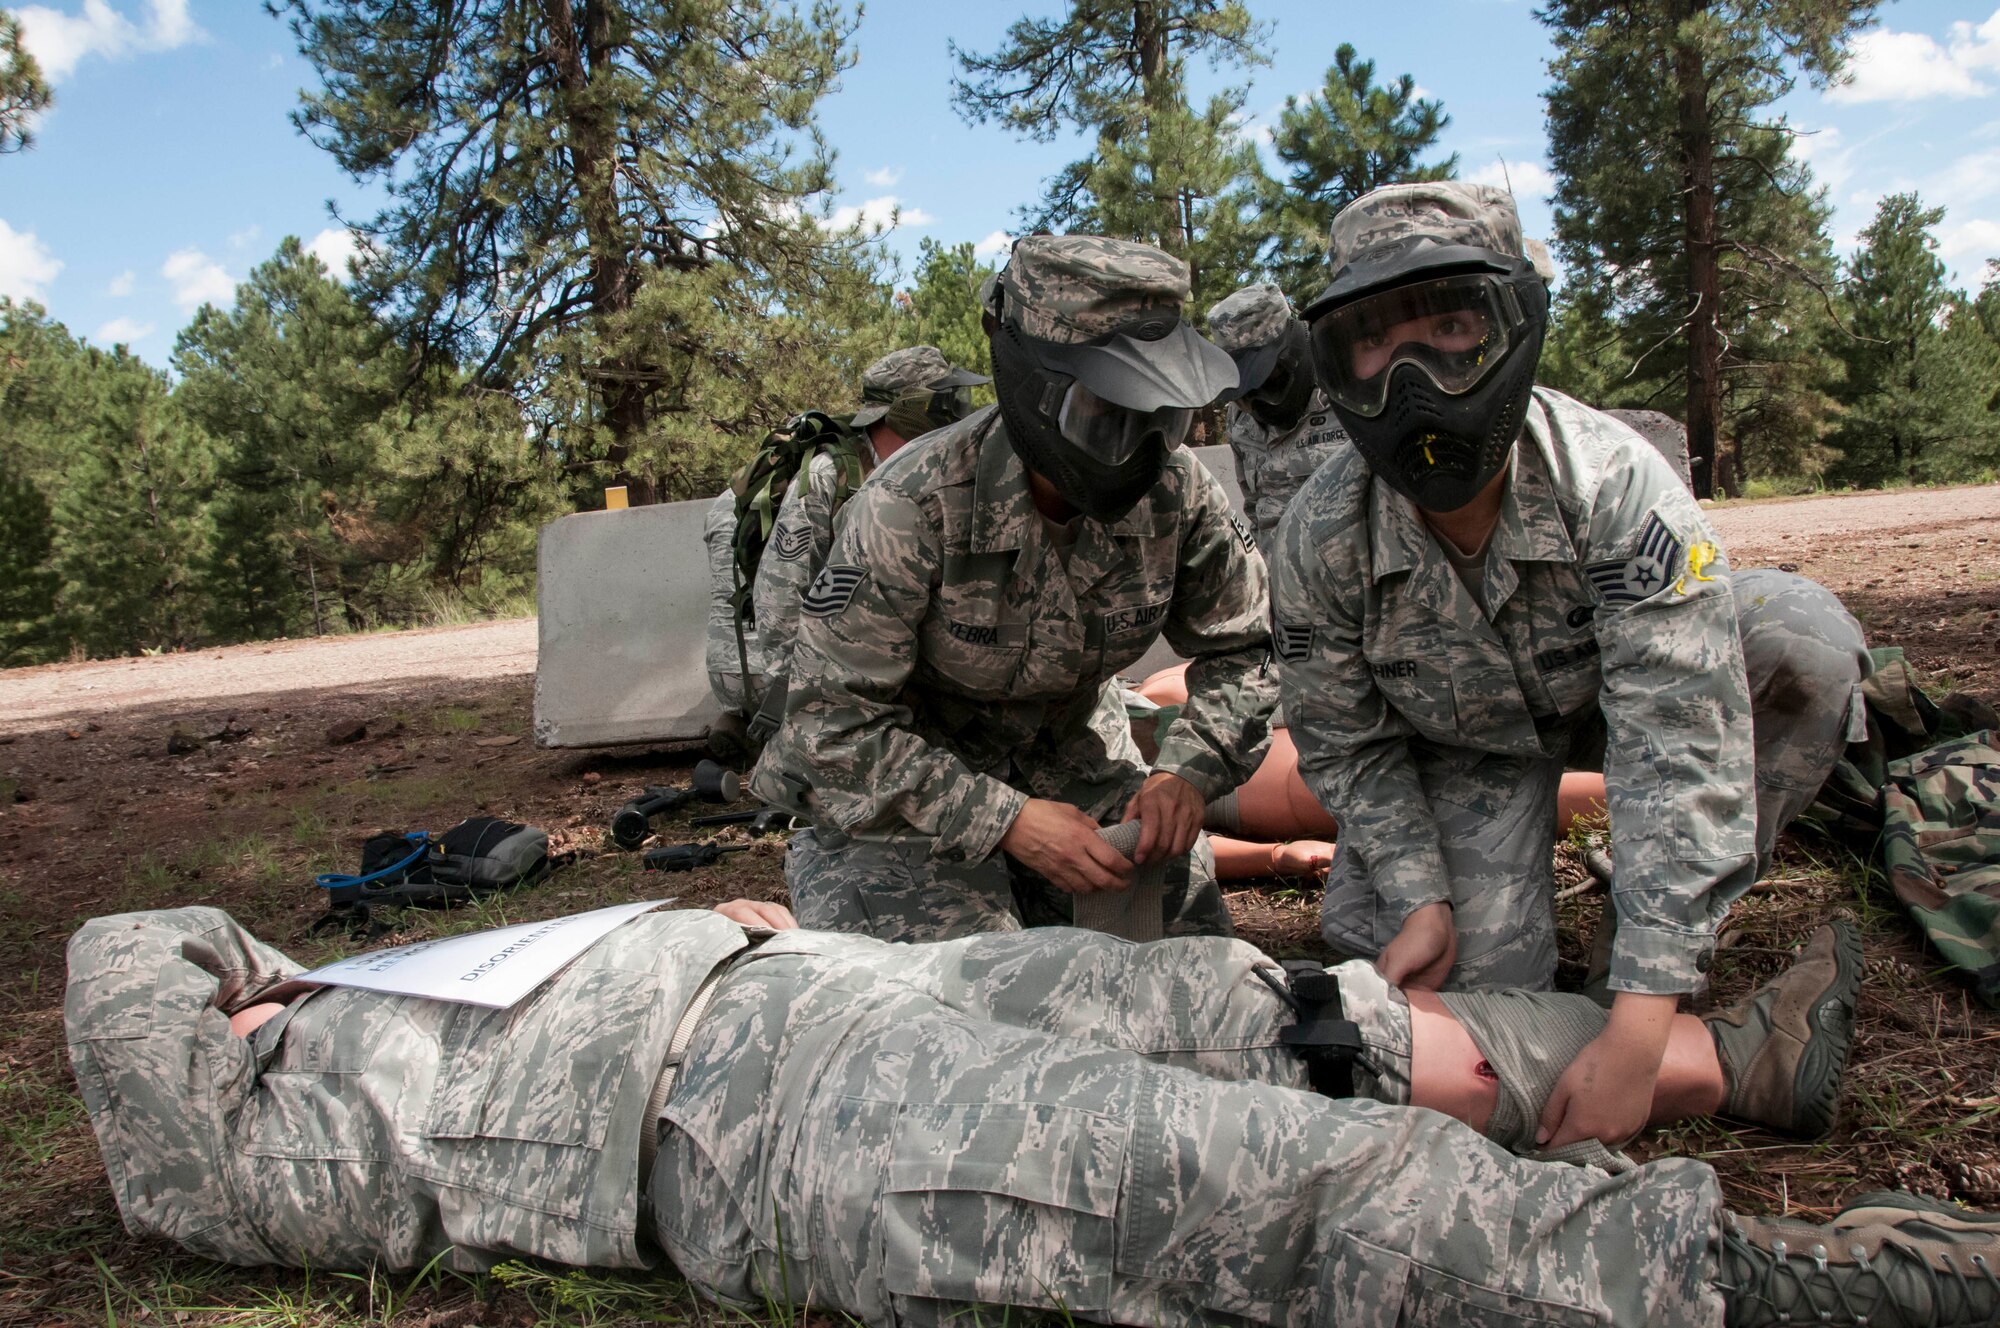 Tech. Sgt. Christine Yebra and Staff Sgt. Cory Zehner put their self-aid and buddy care skills to the test while keeping an eye out for enemy gun fire during the care-under-fire exercise. More than 70 Airmen from the 162nd Wing ventured up to the cool pines of Bellemont, Ariz. during a training exercise Aug. 11-15 at Camp Navajo Collective Training Center. (U.S. Air National Guard photo by 2nd Lt. Lacey Roberts)